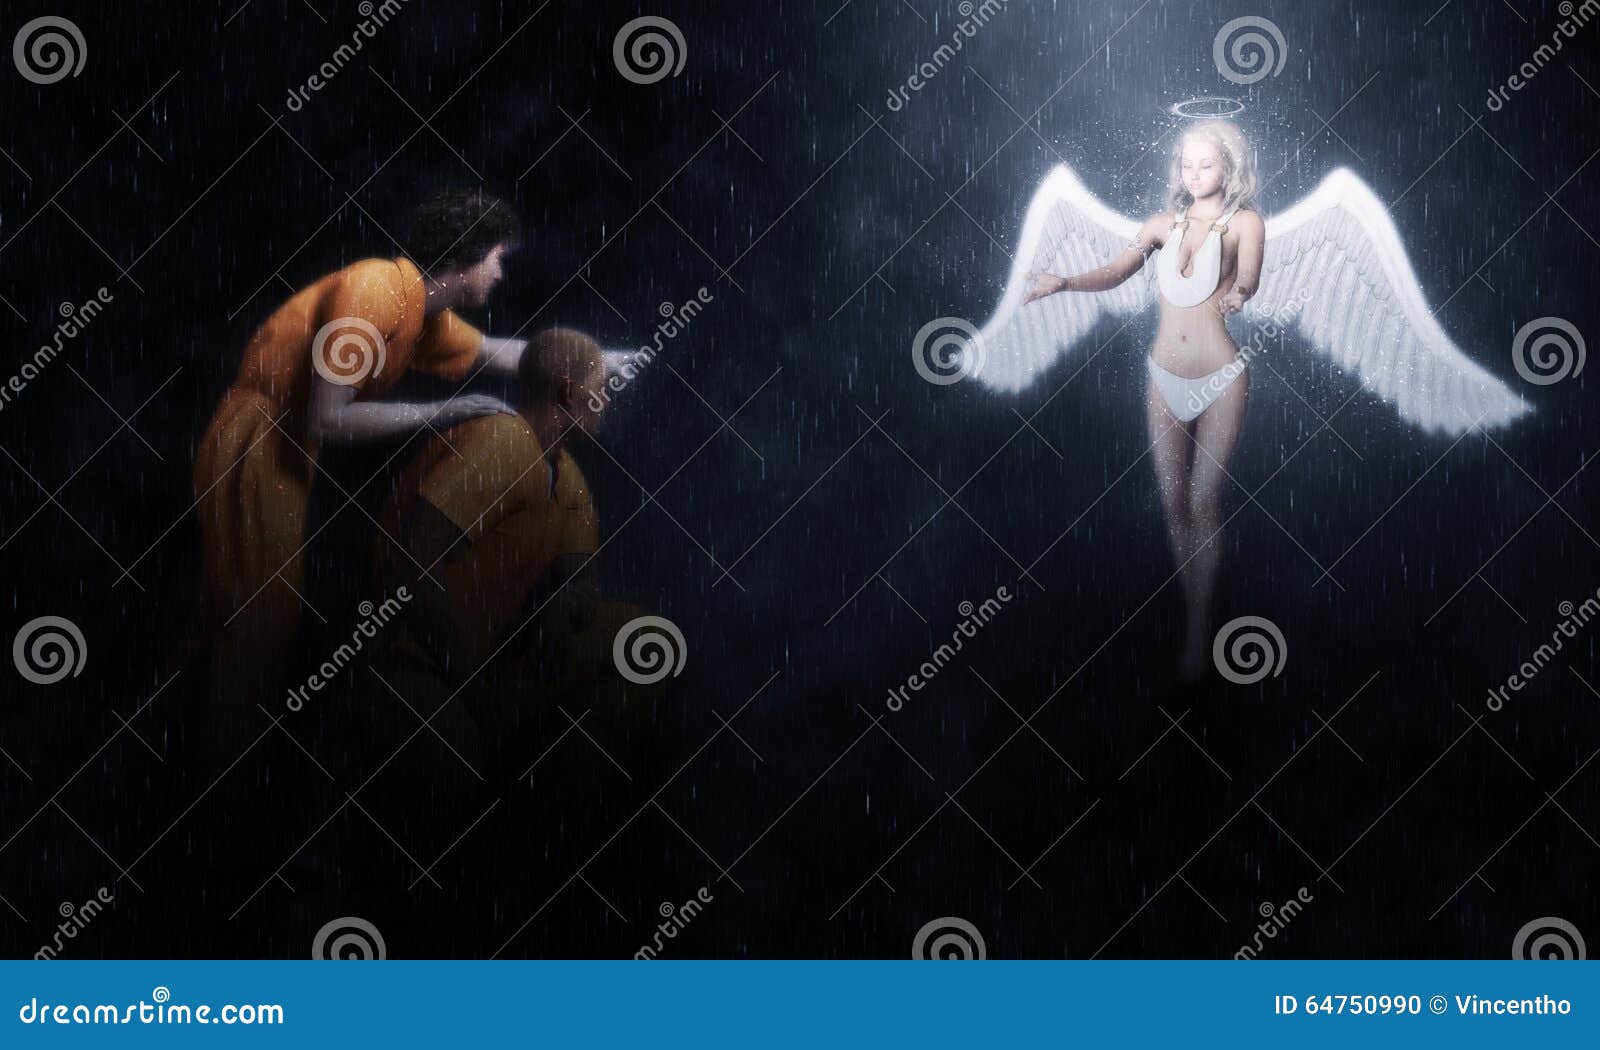 prisoners encounter with an angel 